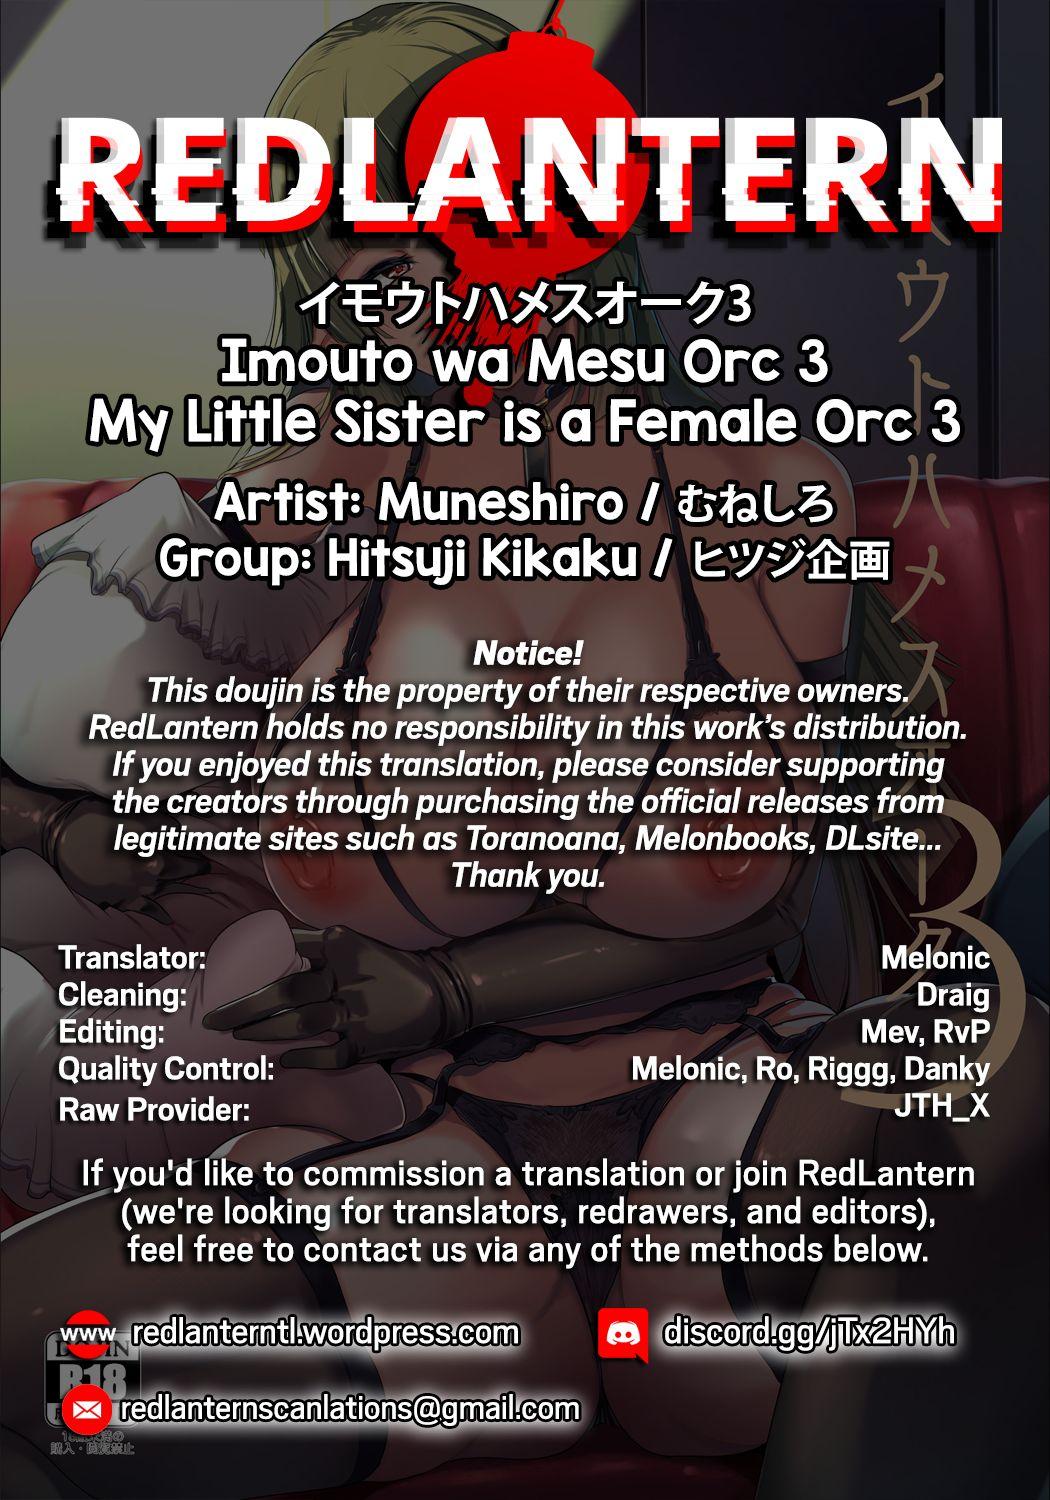 Imouto wa Mesu Orc 3 | My Little Sister is a Female Orc 3 29